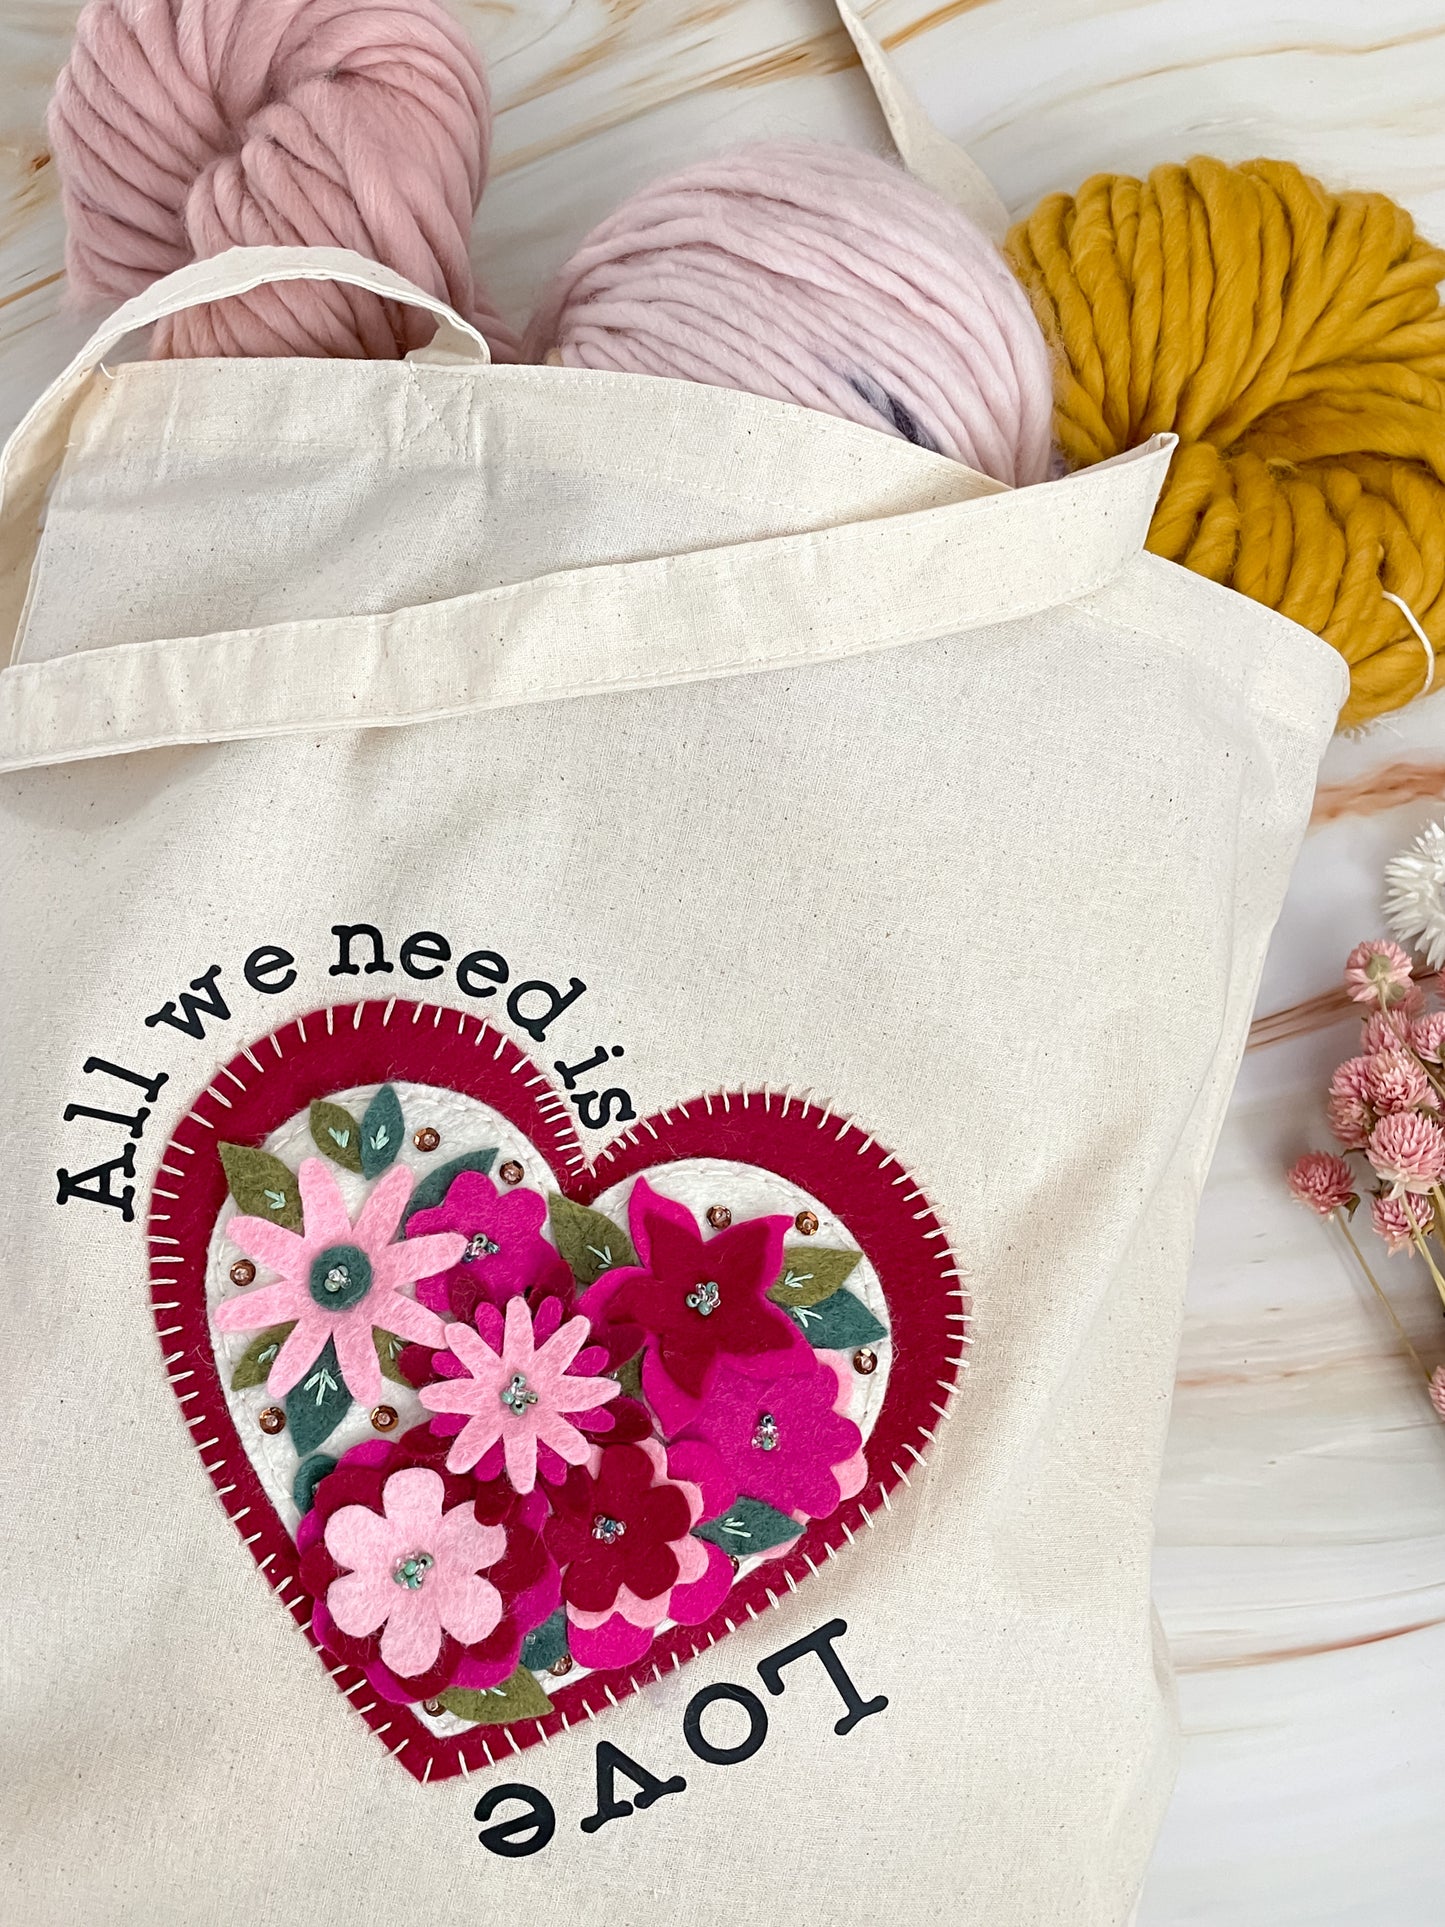 All We Need is Love Bag